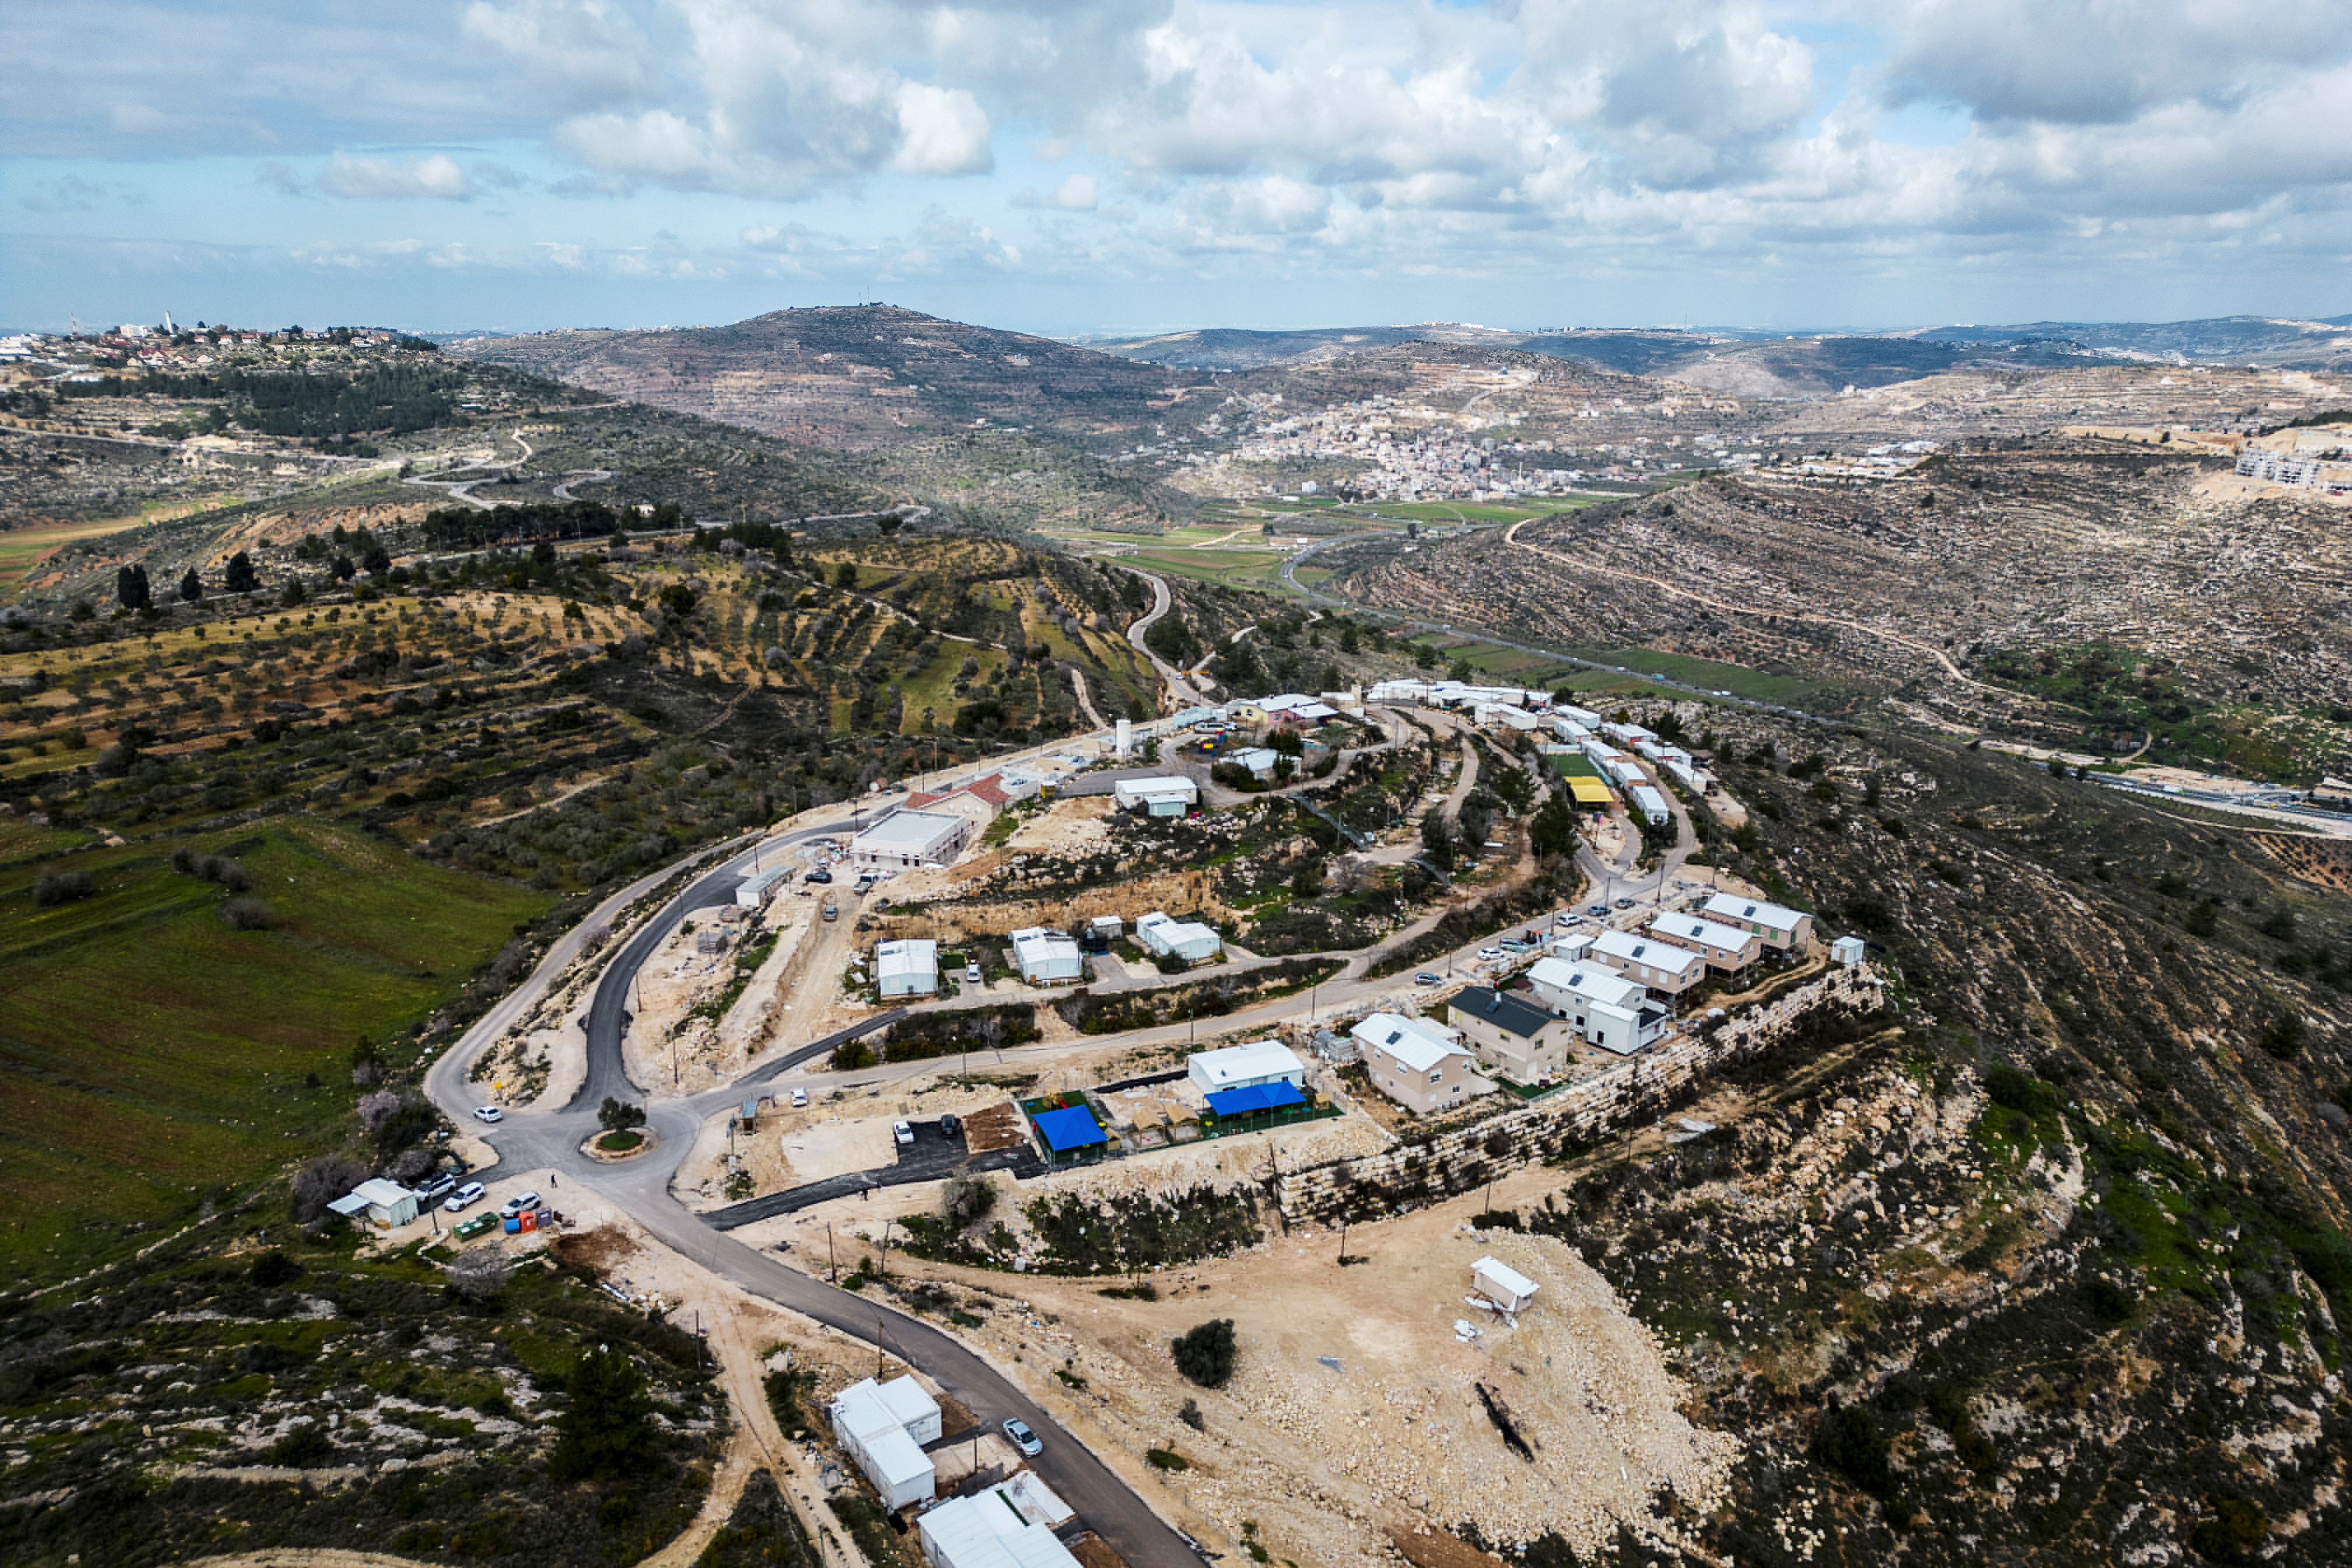 An aerial view shows mobile homes in the Jewish settlement of Givat Haroeh in the Israeli-occupied West Bank